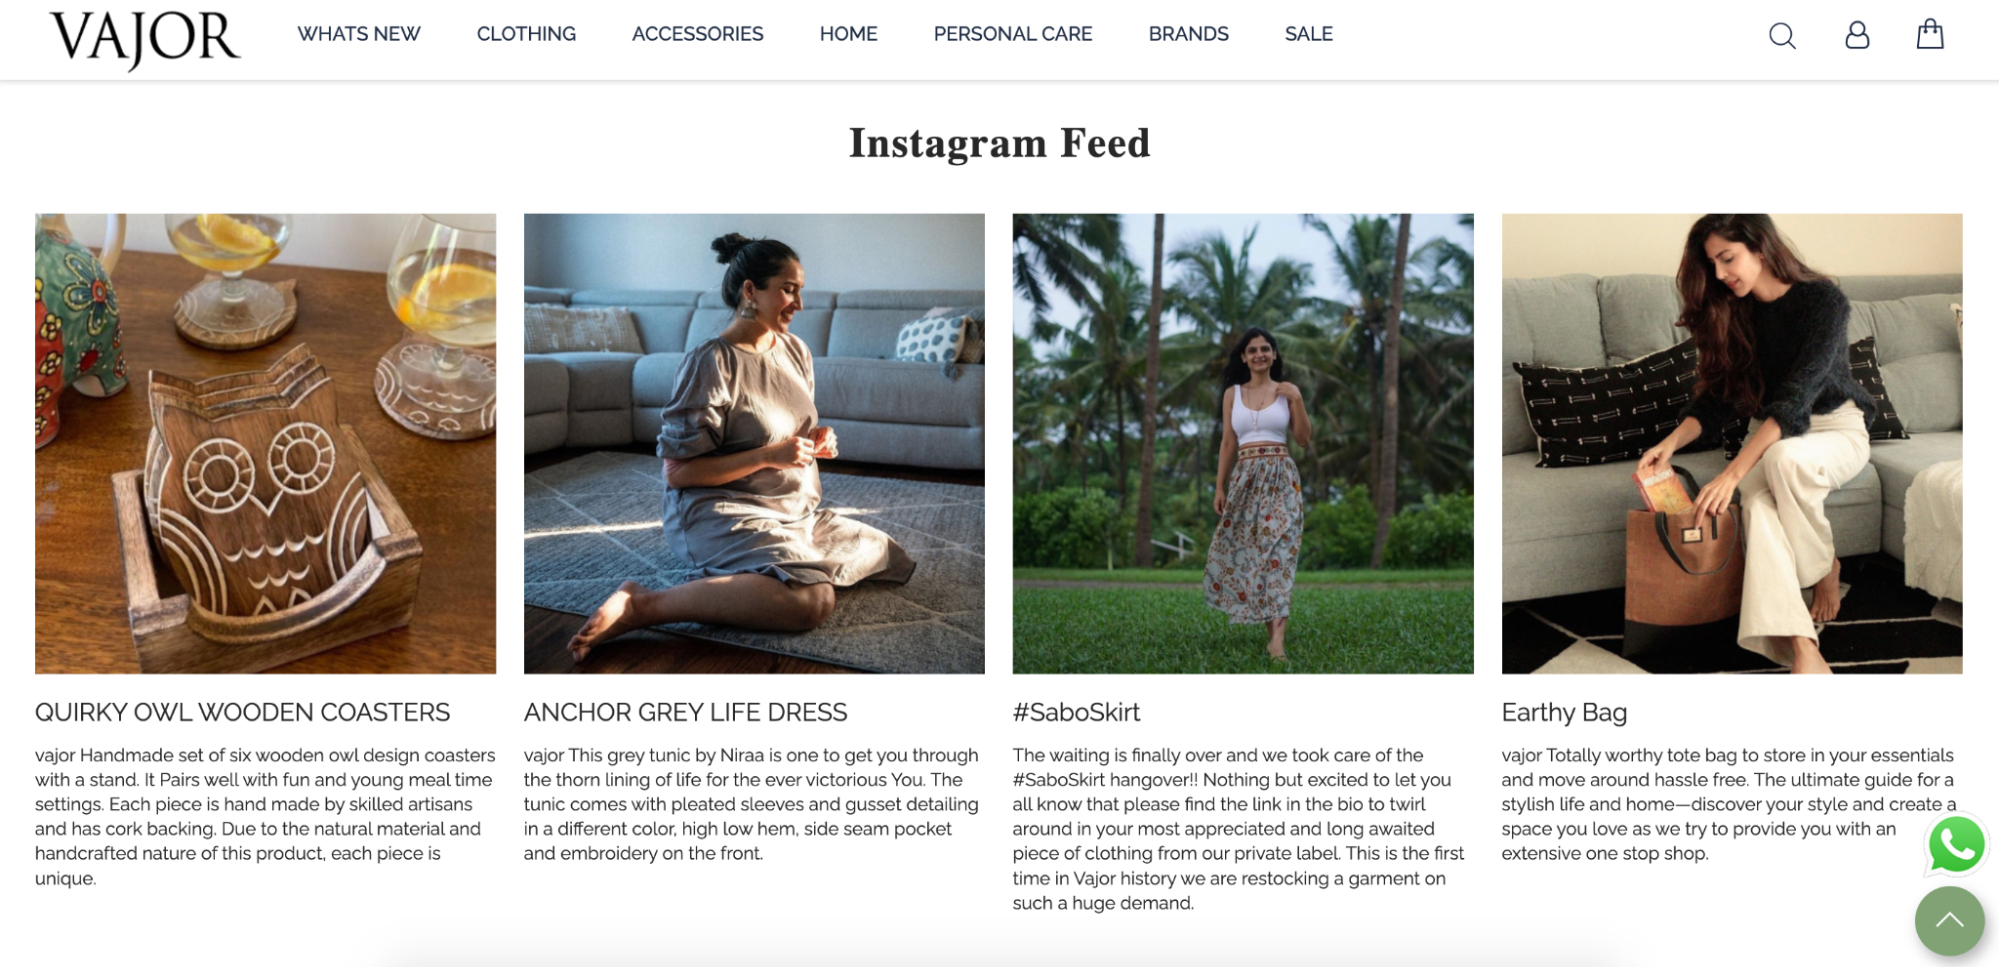 A section of Vajor’s homepage showing its embedded Instagram feed with four images.